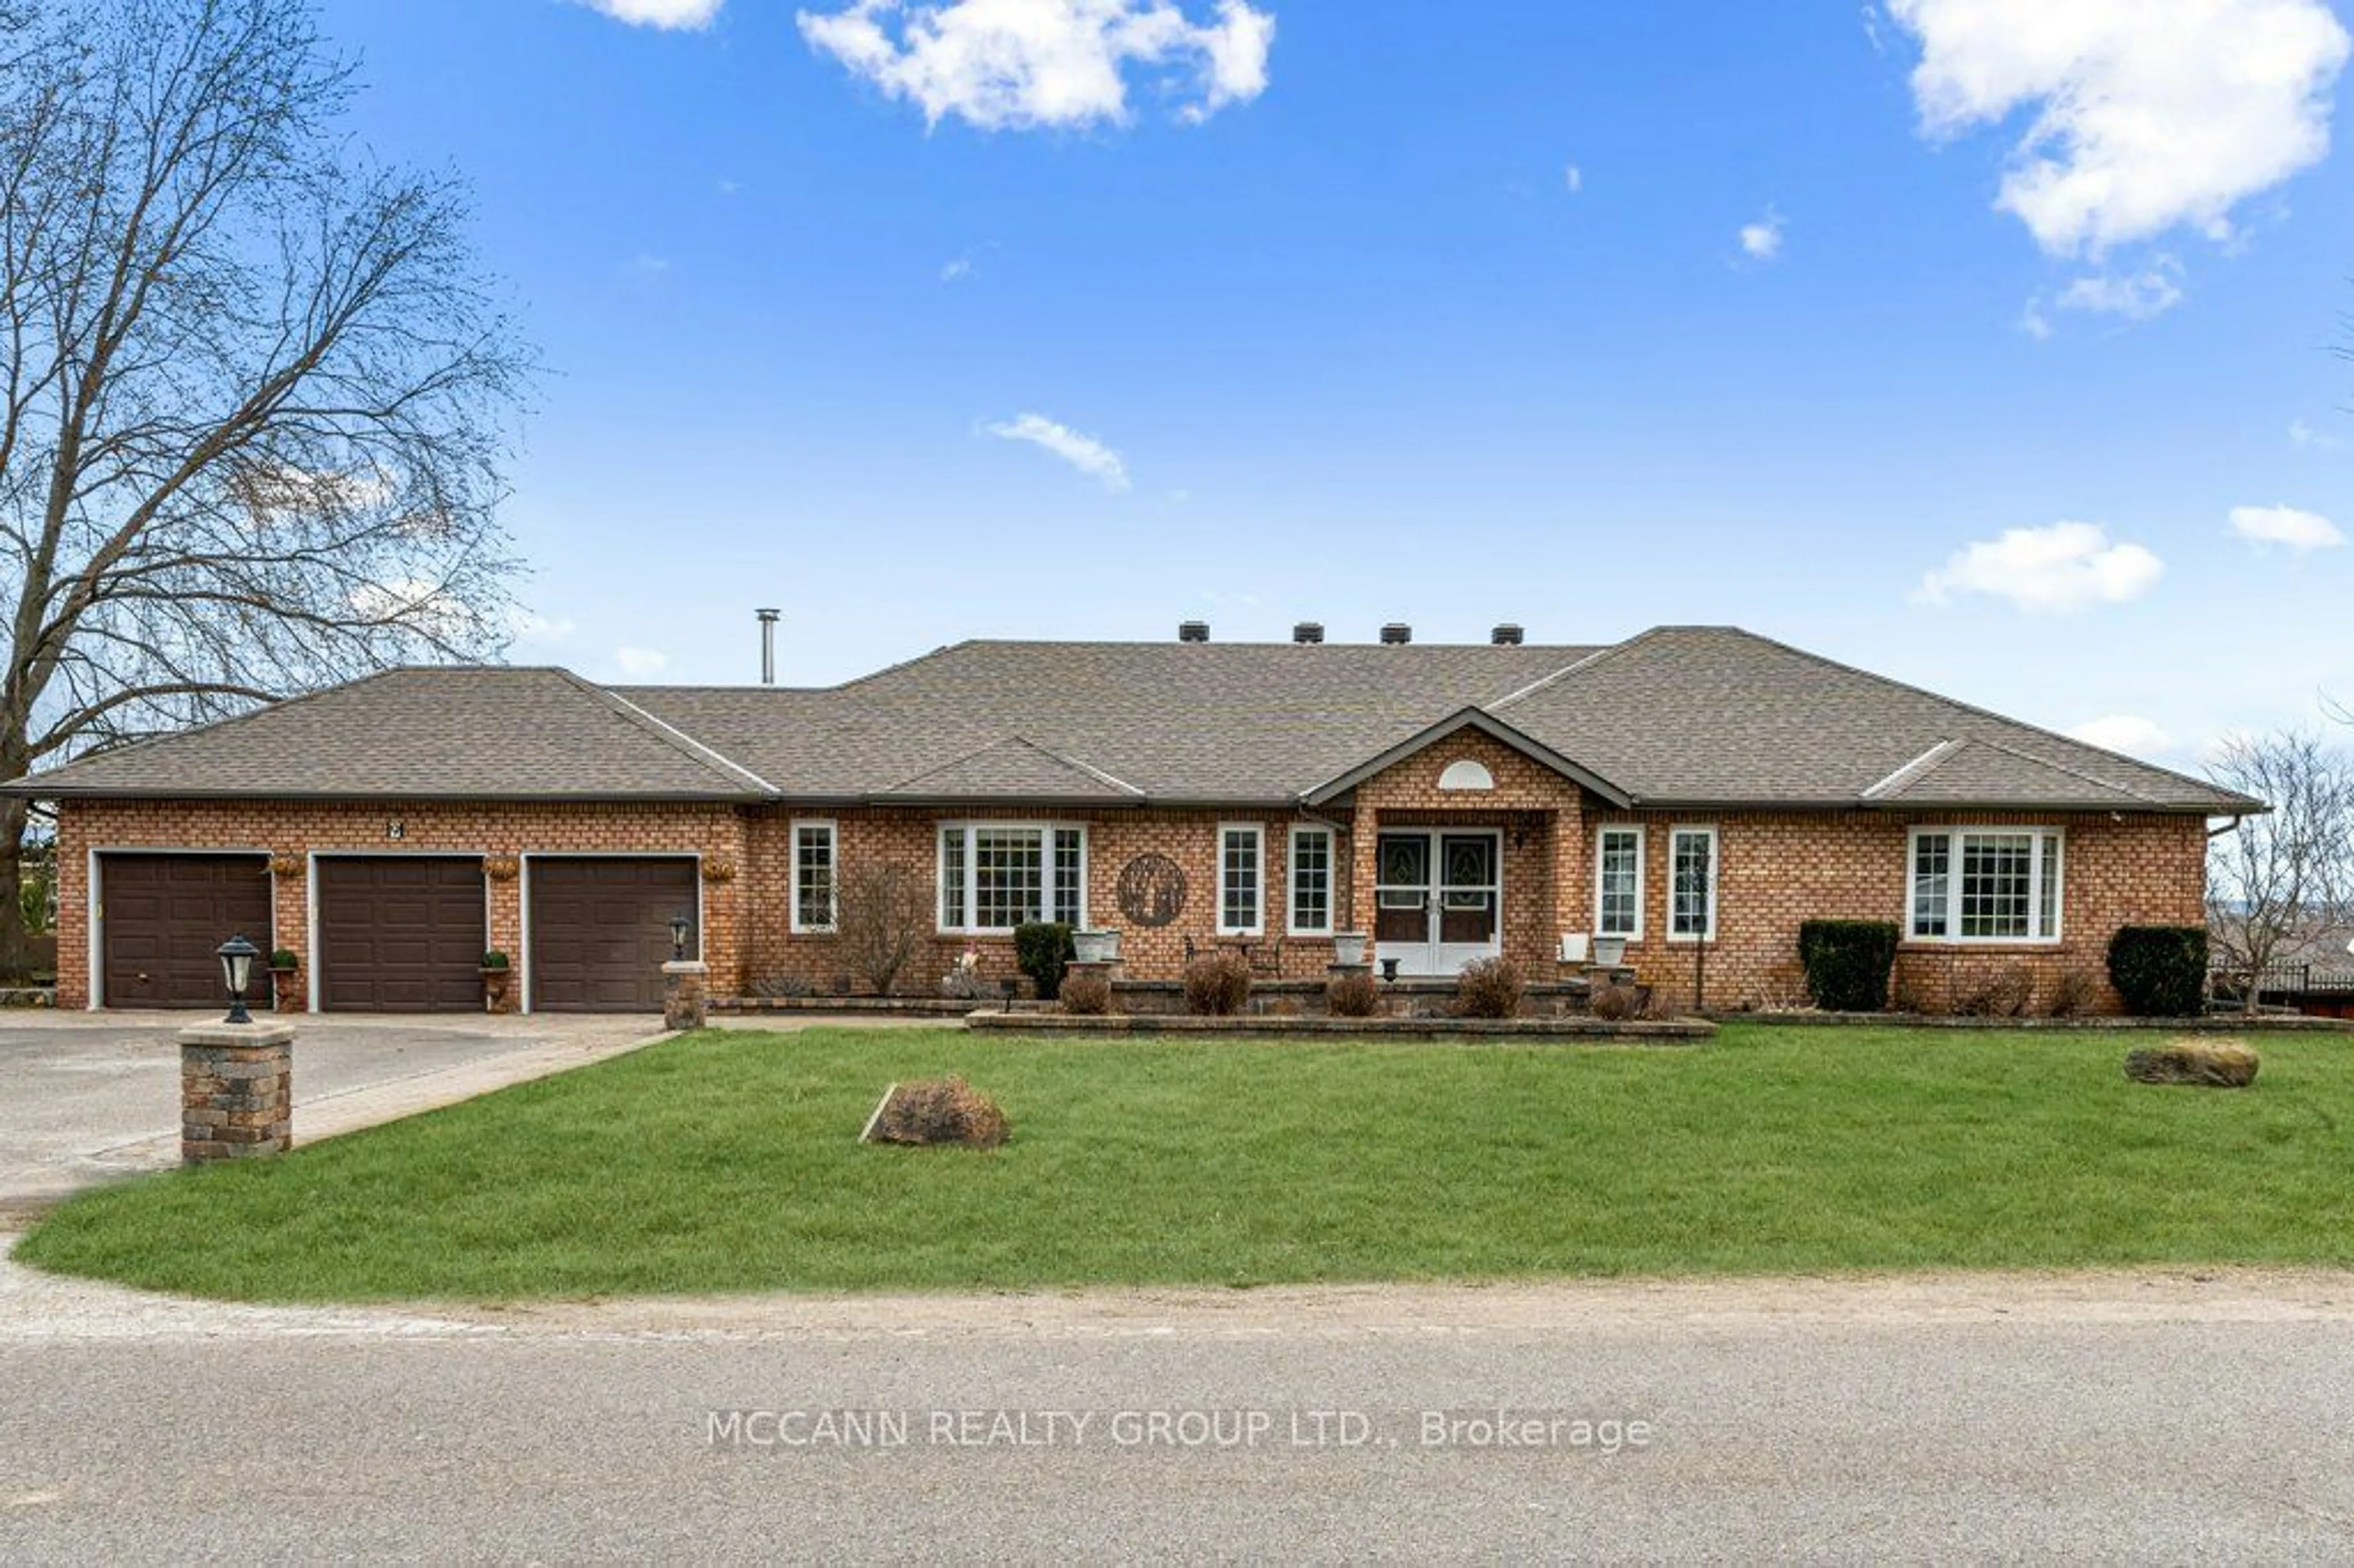 Home with brick exterior material for 9 Brownlee Dr, Bradford West Gwillimbury Ontario L3Z 2K4